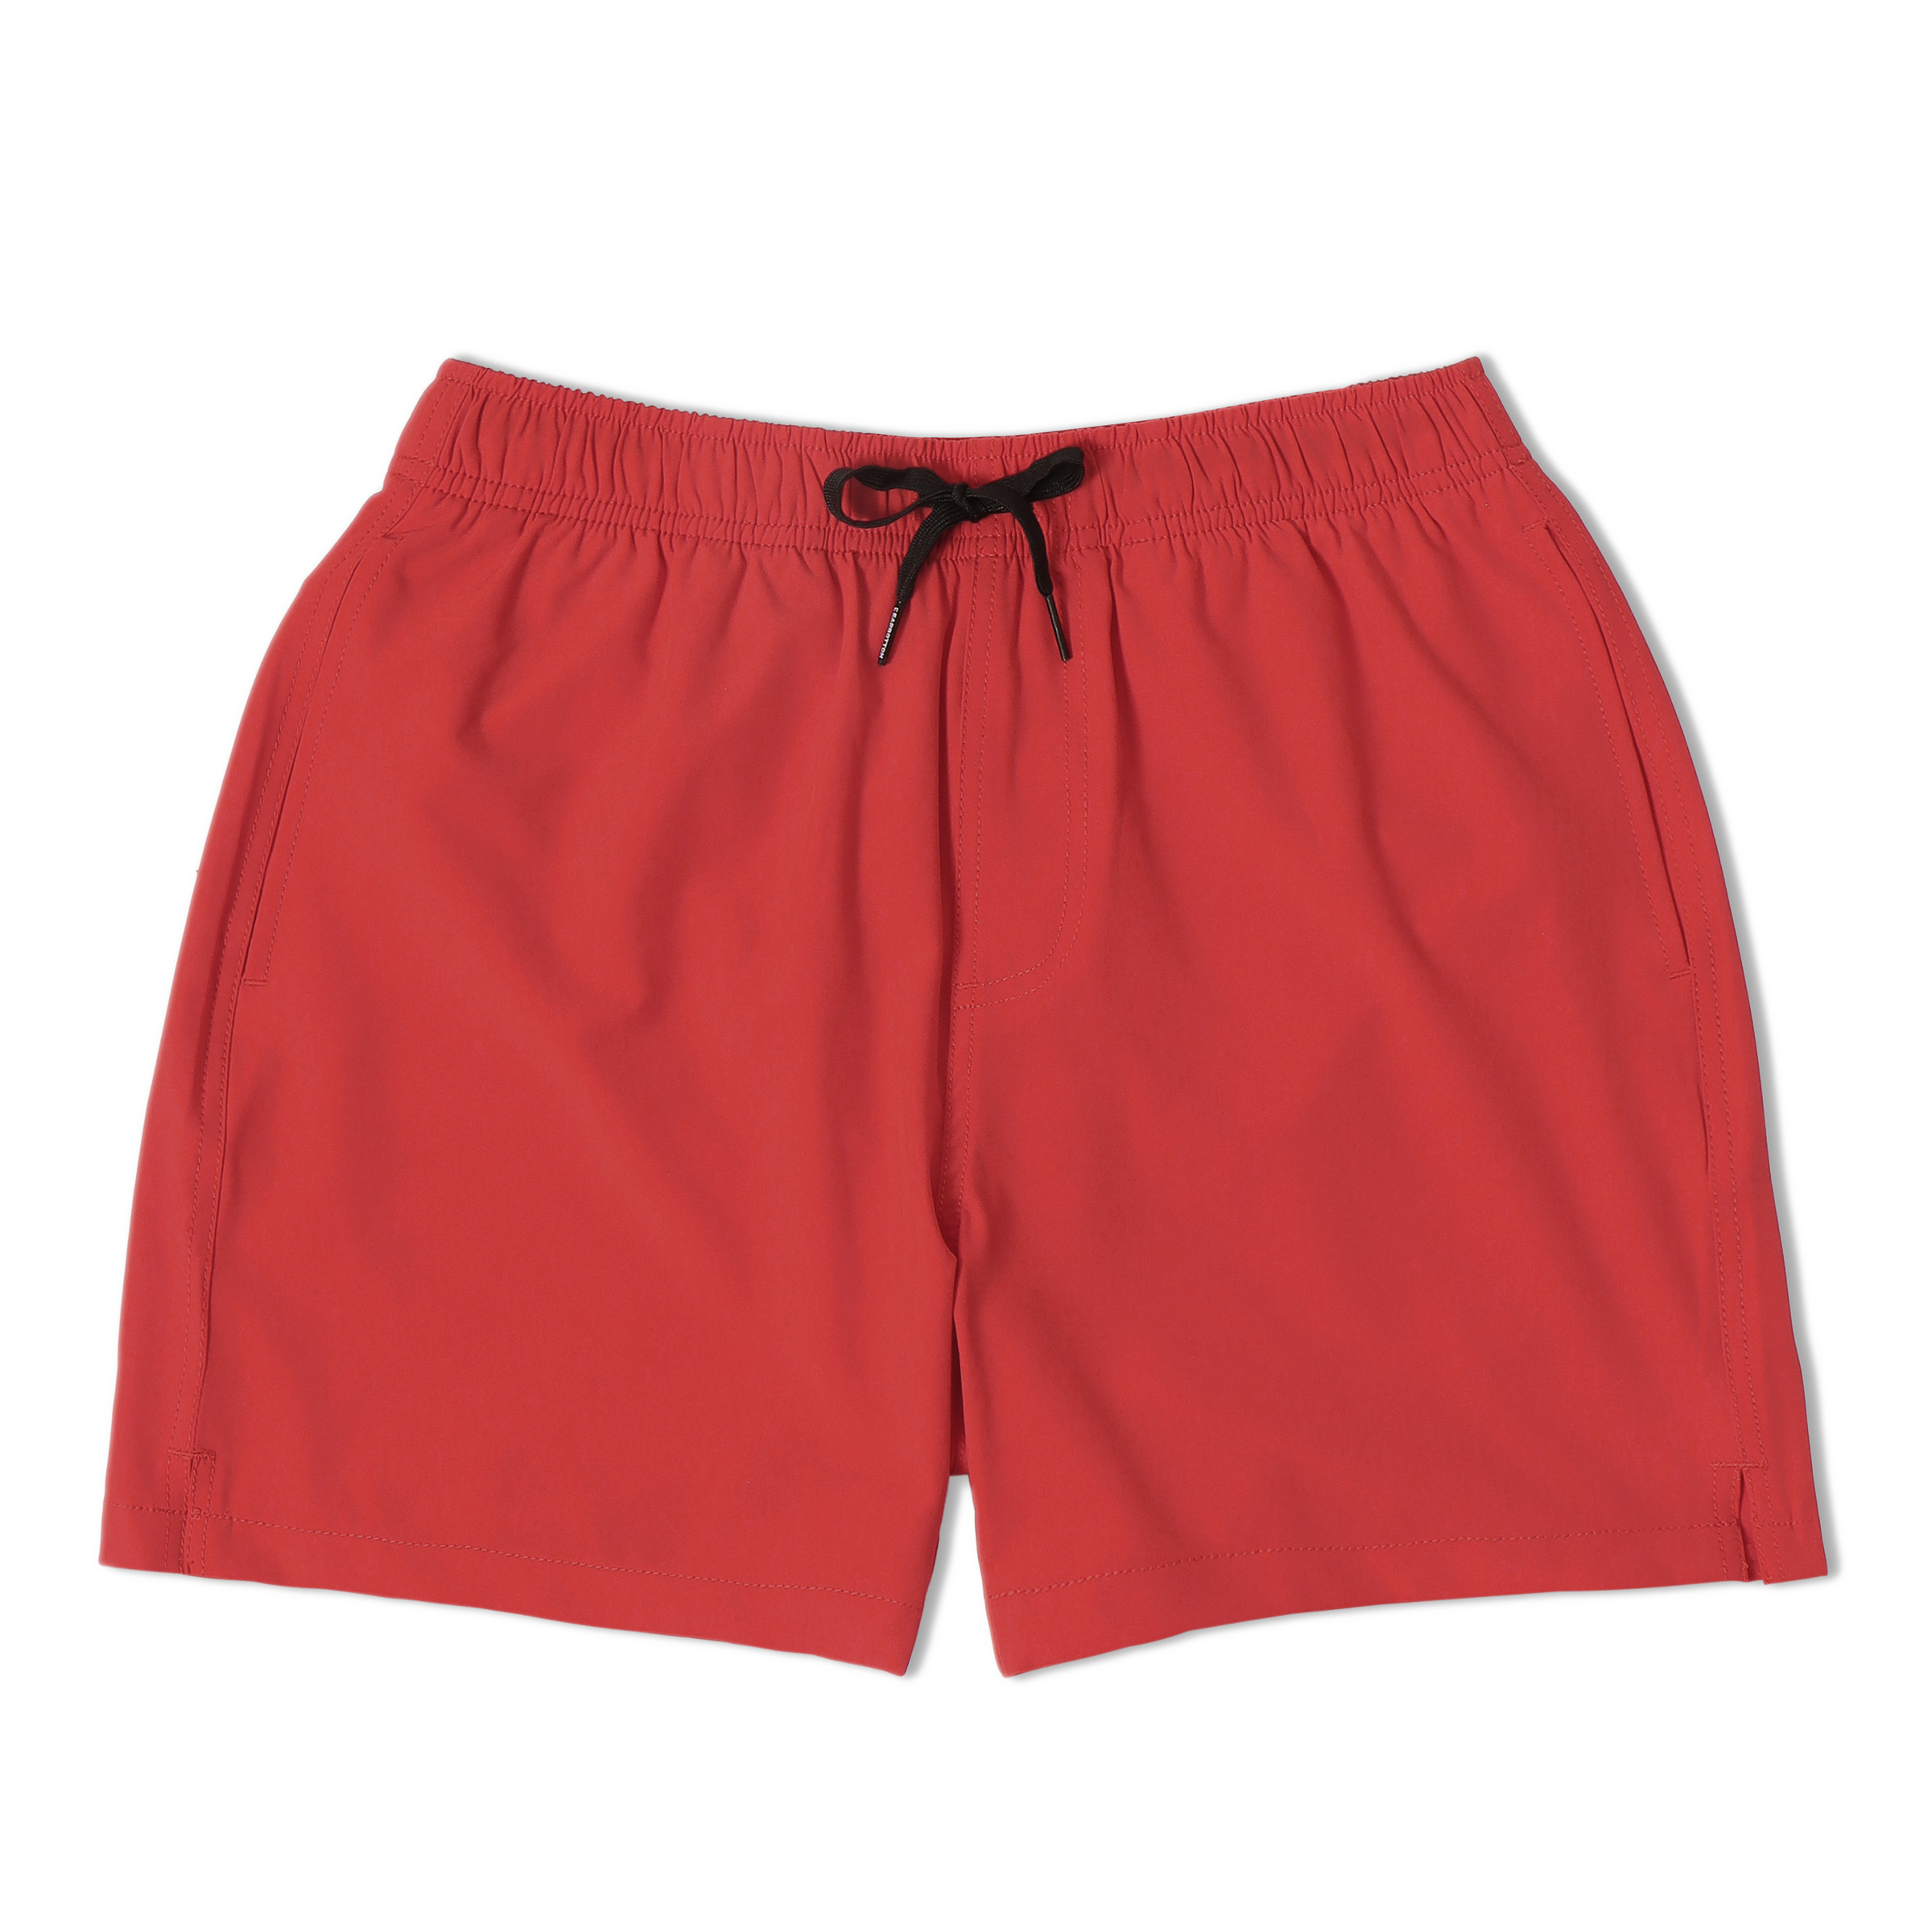 Stretch Swim 5.5" in Red front with elastic waistband, black drawstring, and two inseam pockets